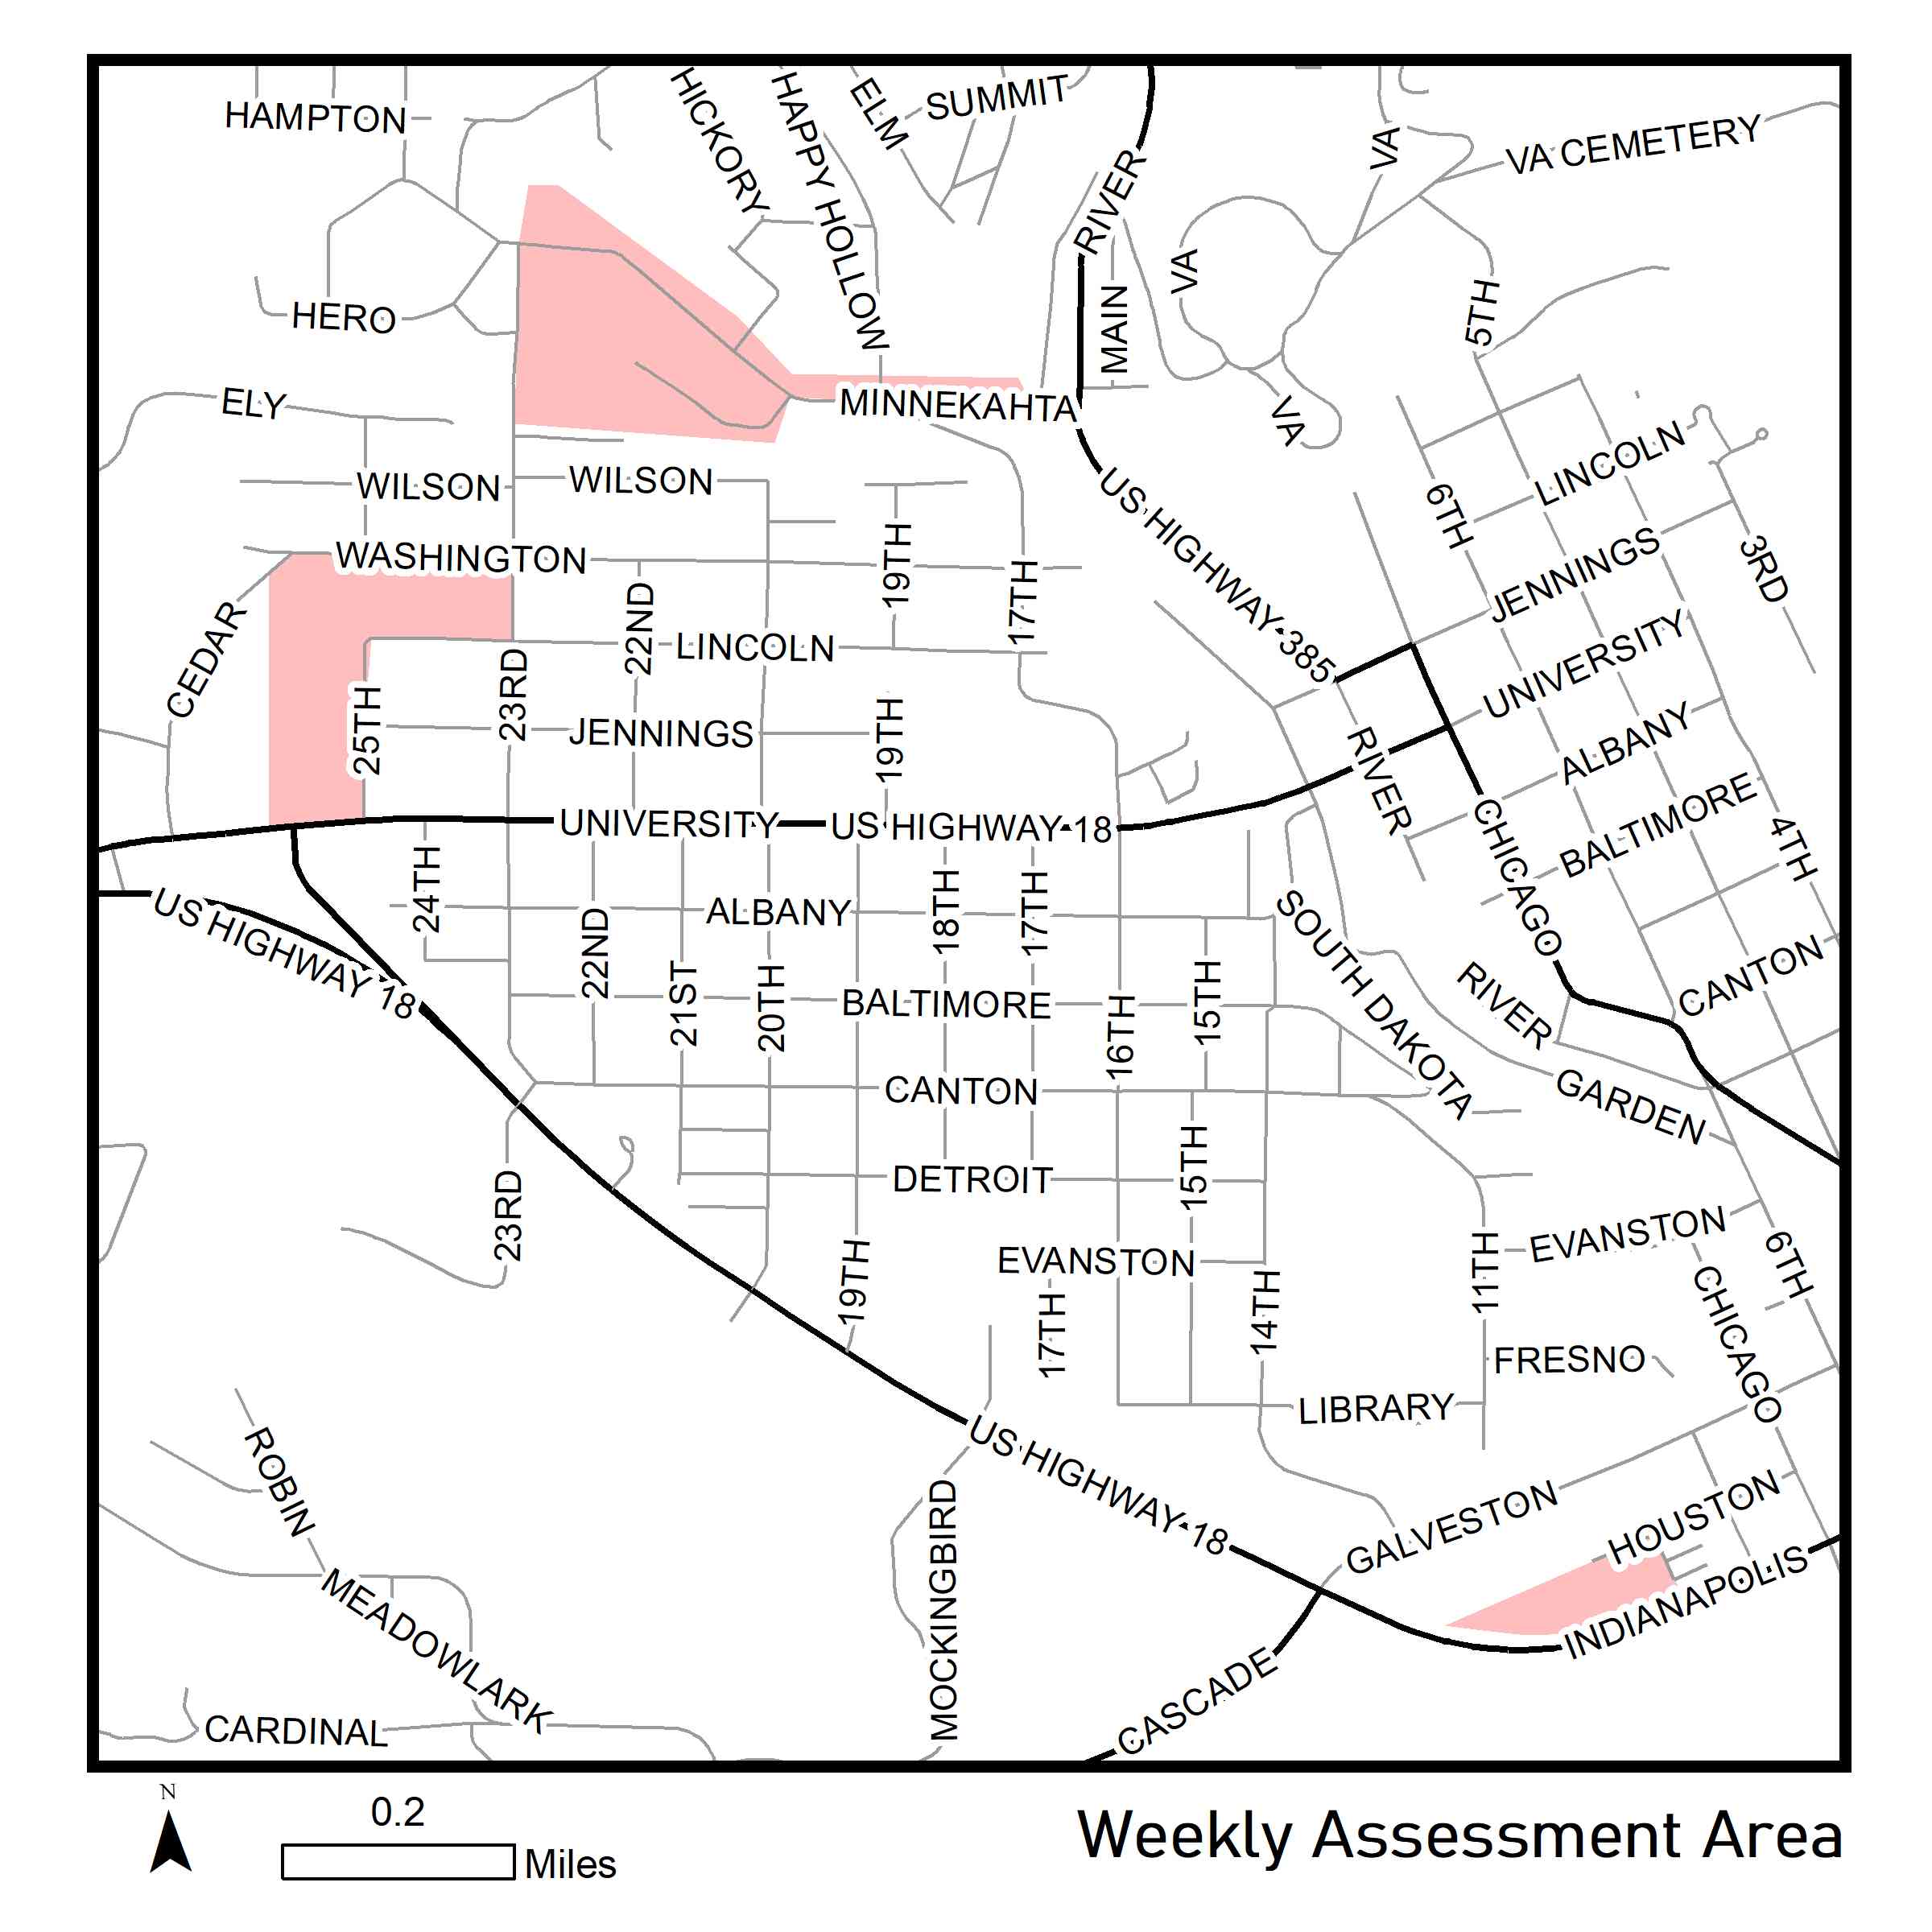 Map of reassessment area week of July 13th 2020, updated map.